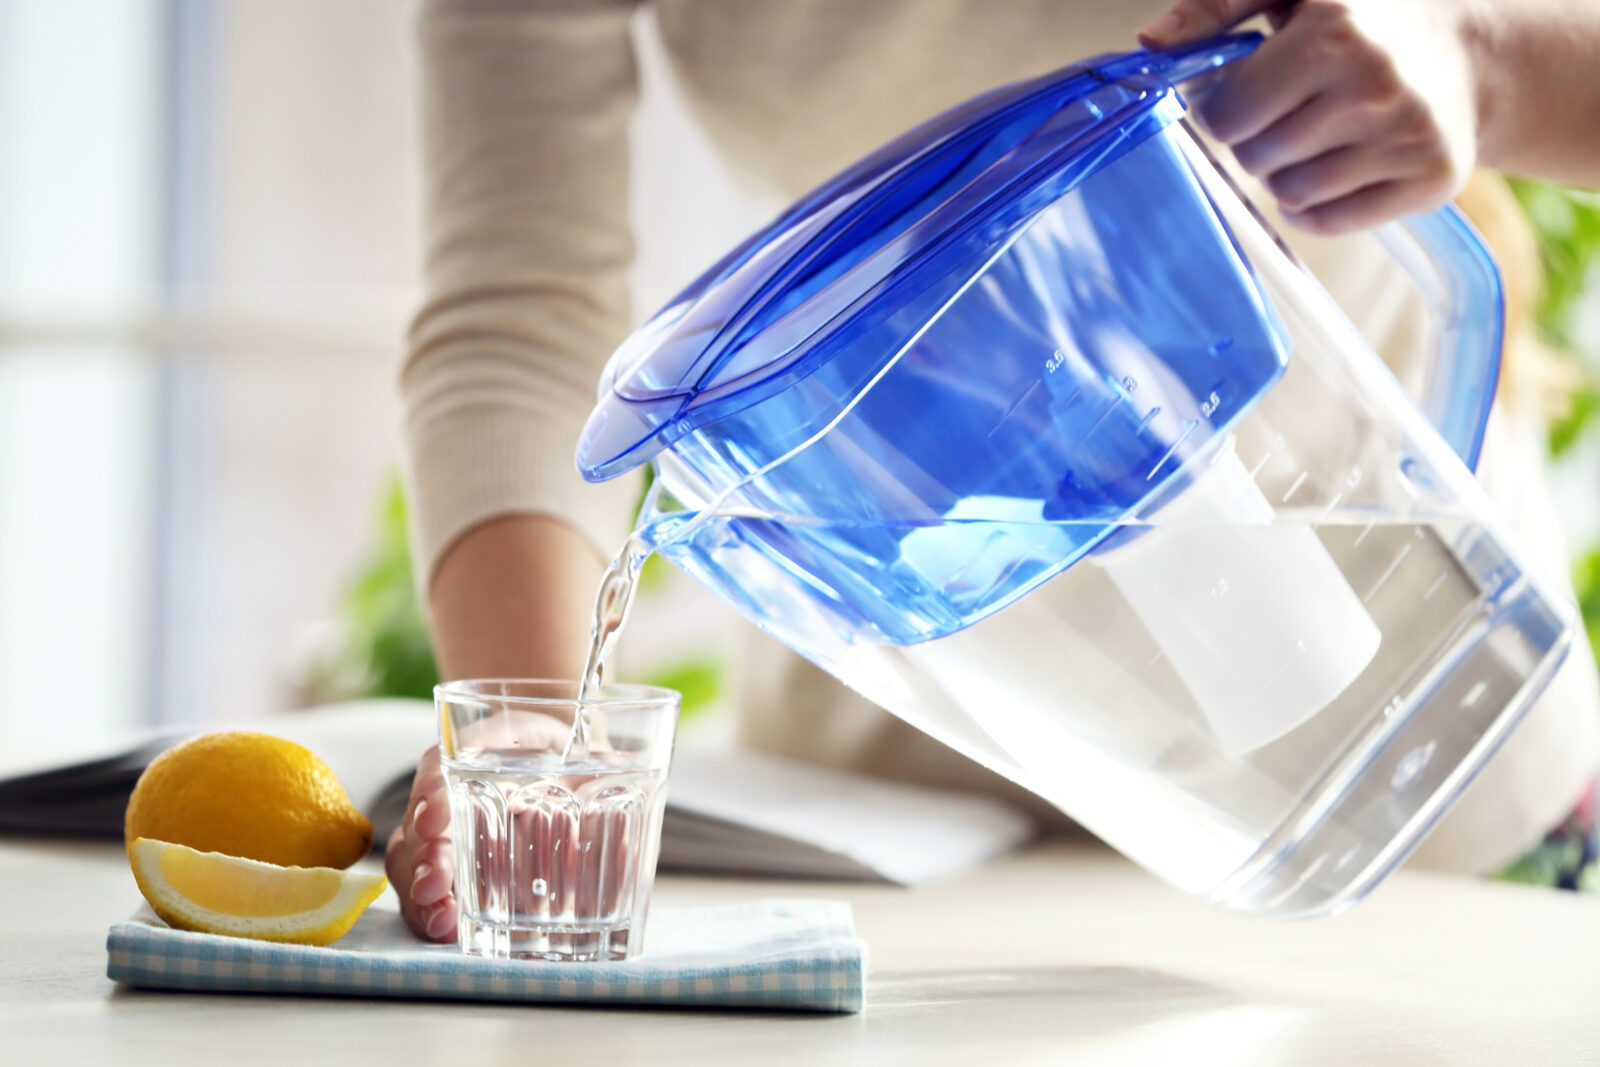 Woman pouring water from filter jug into glass in the kitchen 2023/05/AdobeStock_109078940.jpeg 